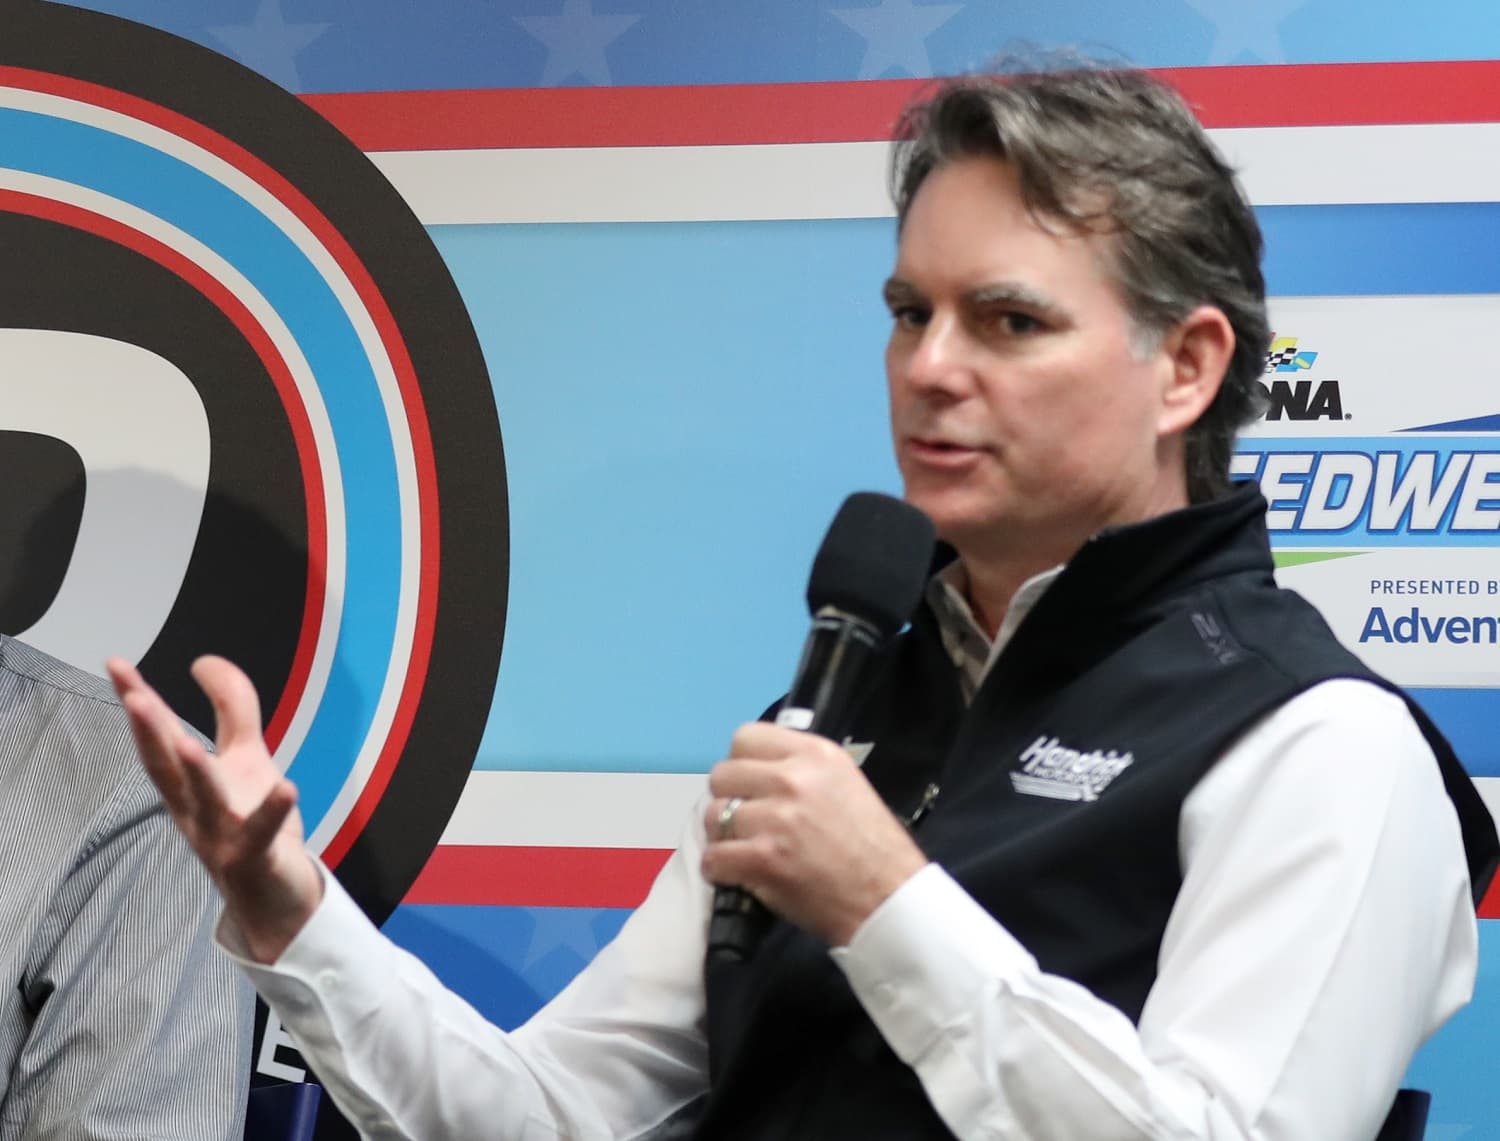 NASCAR Hall of Fame driver Jeff Gordon speak to the media during a press conference prior to the NASCAR Cup Series Daytona 500 on Feb. 19, 2023.